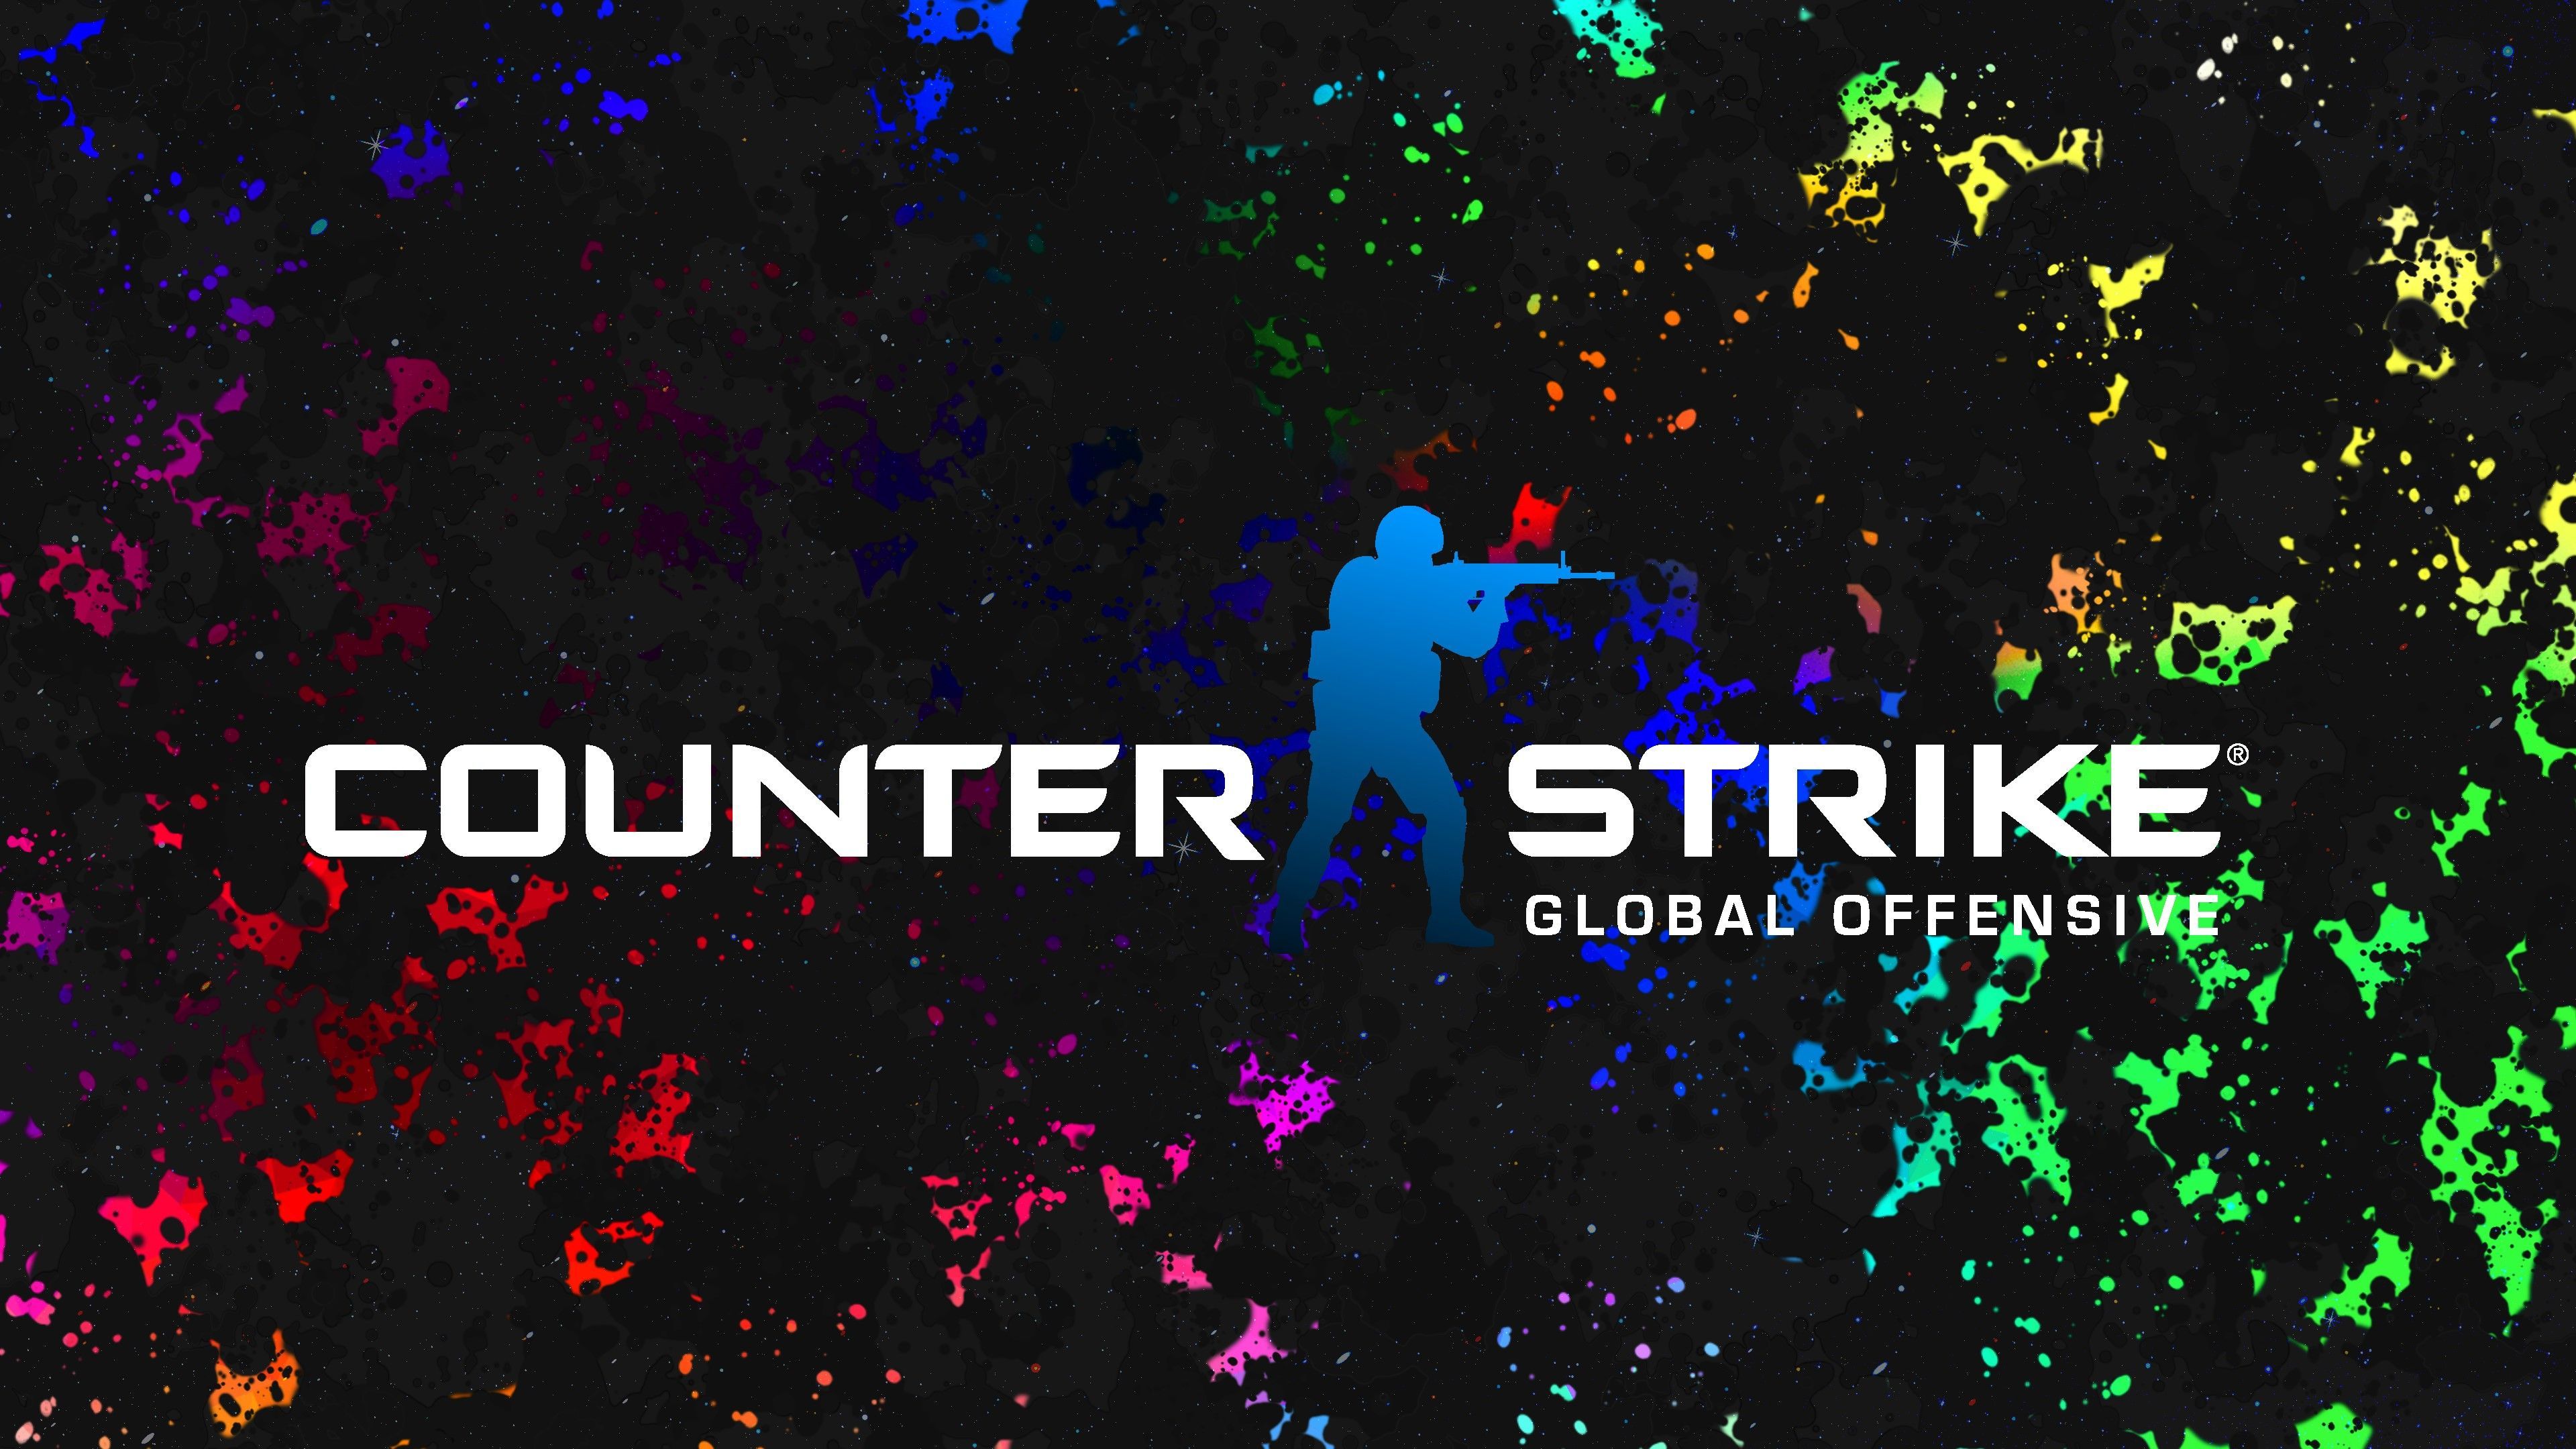 Download wallpaper: Counter Strike: Global Offensive 1366x768